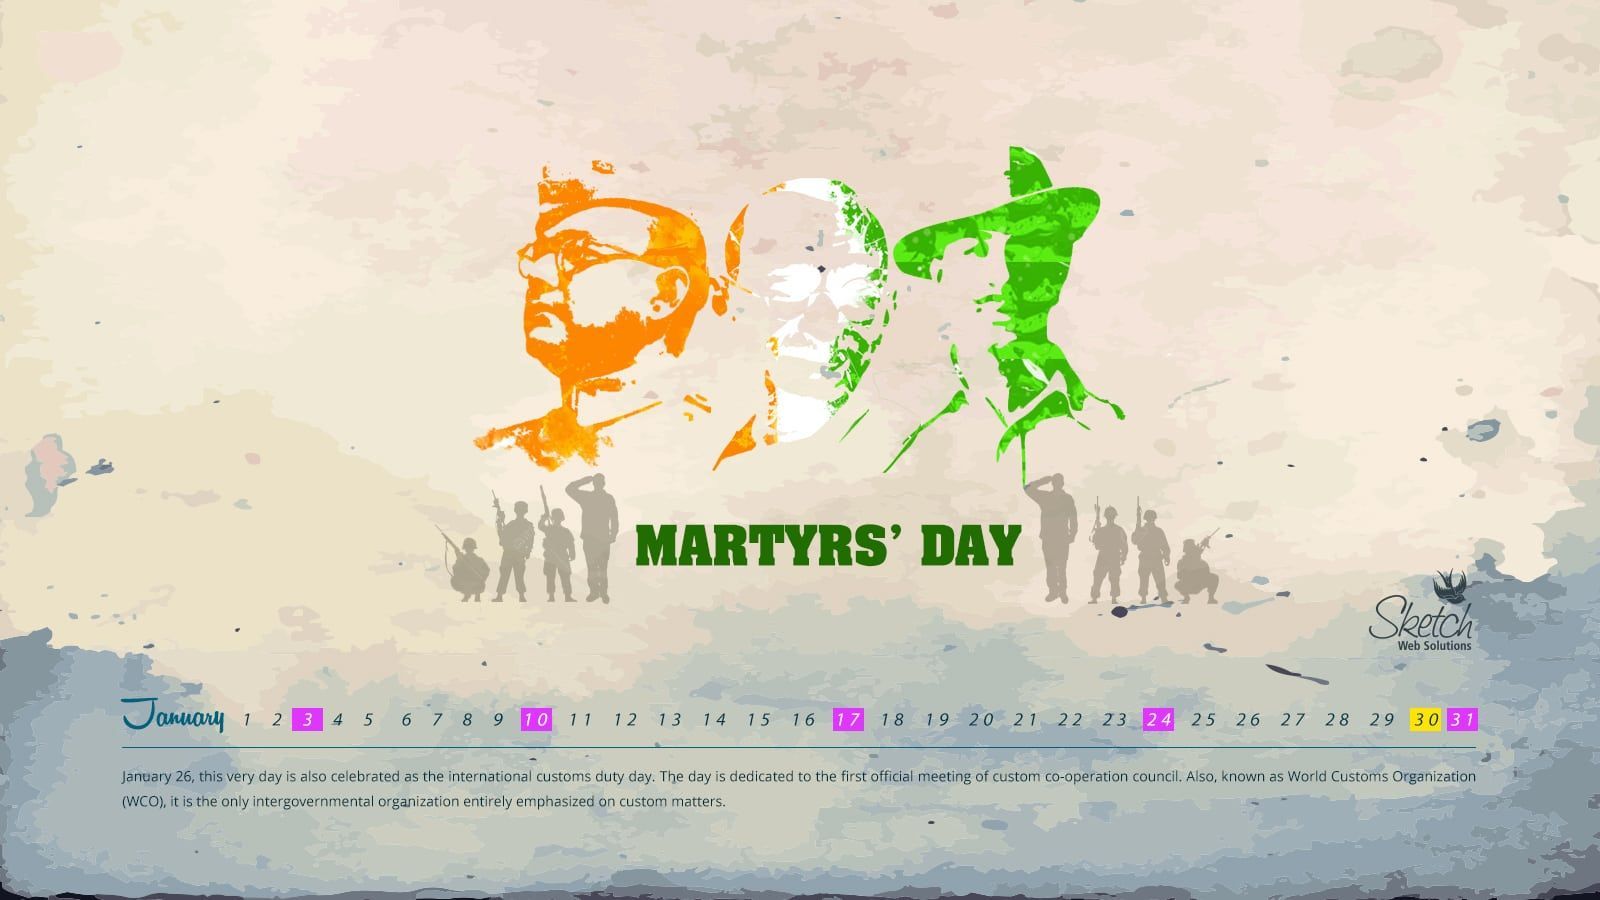 Martyrs Day in India (Shaheed Diwas) 2021. Martyrs' day, Martyrs, India quotes